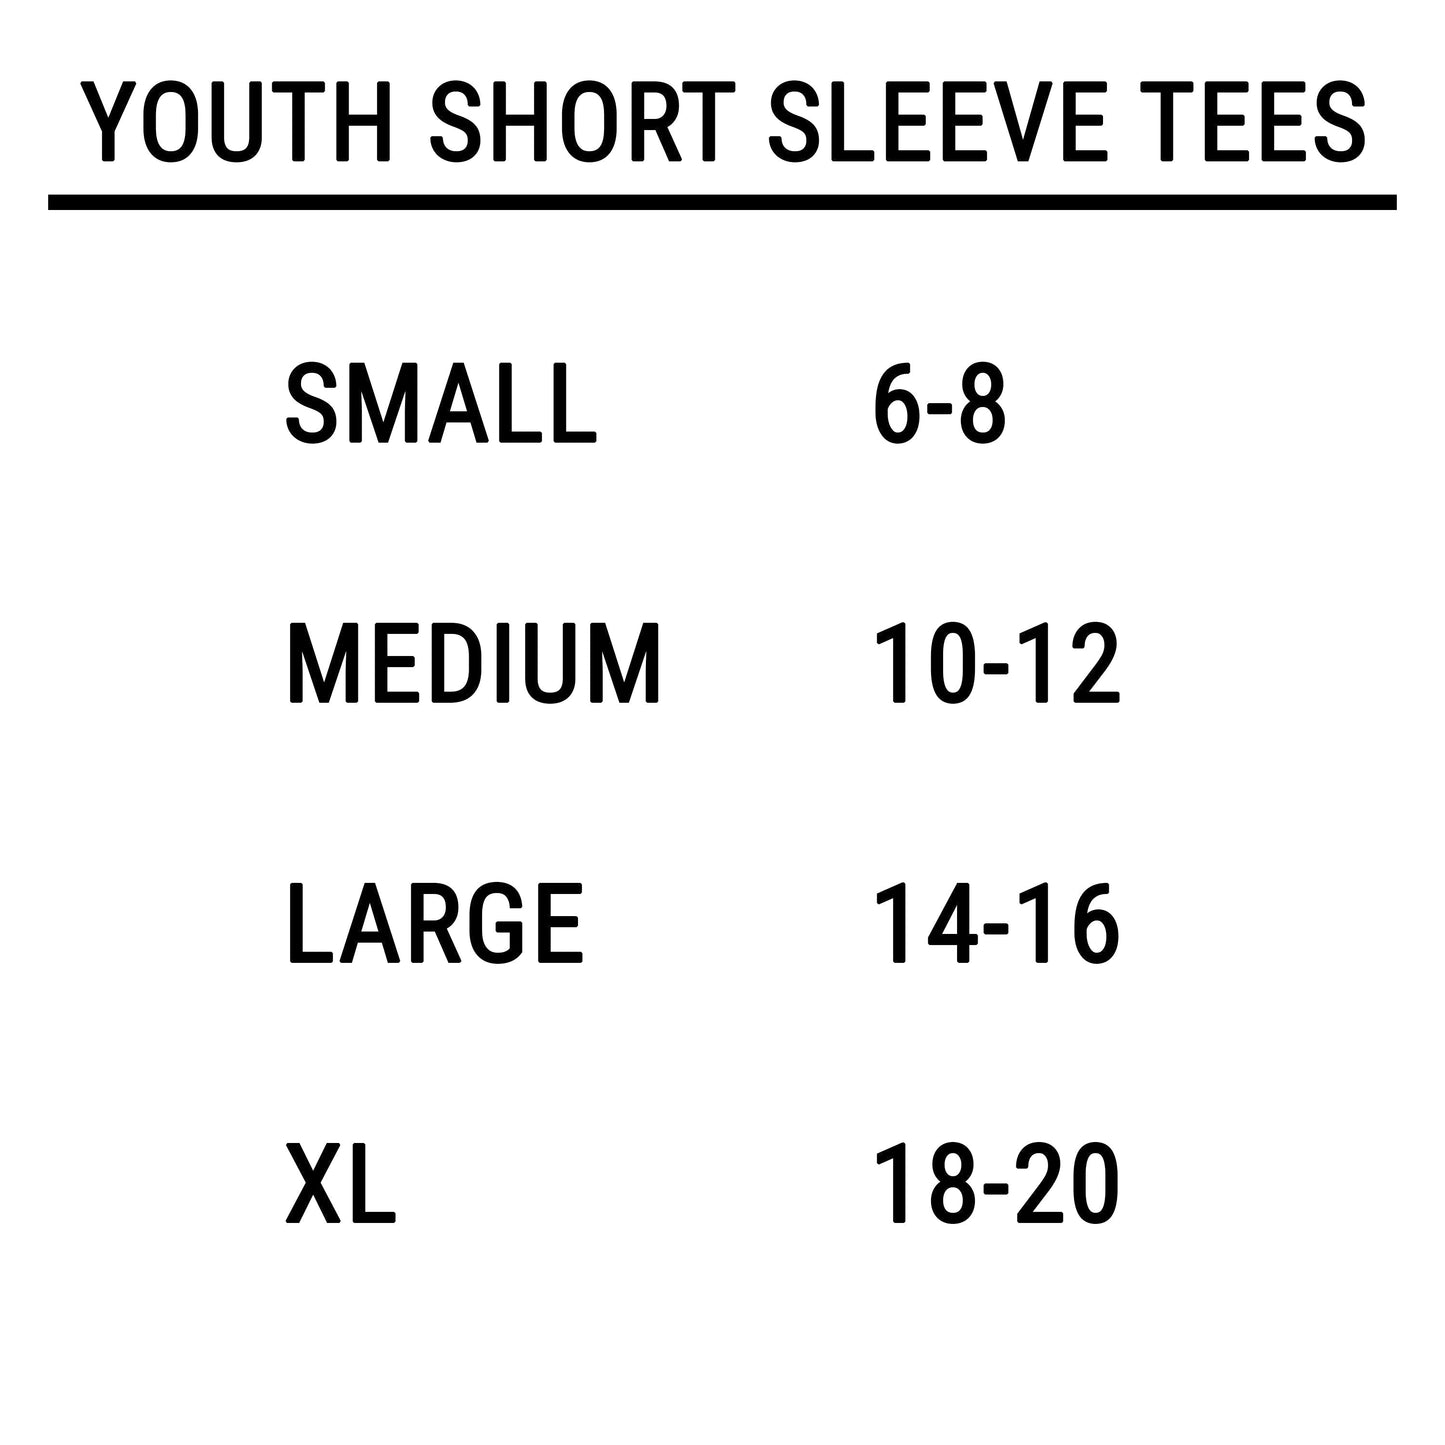 Spooky Smiley Jack | Youth Graphic Short Sleeve Tee